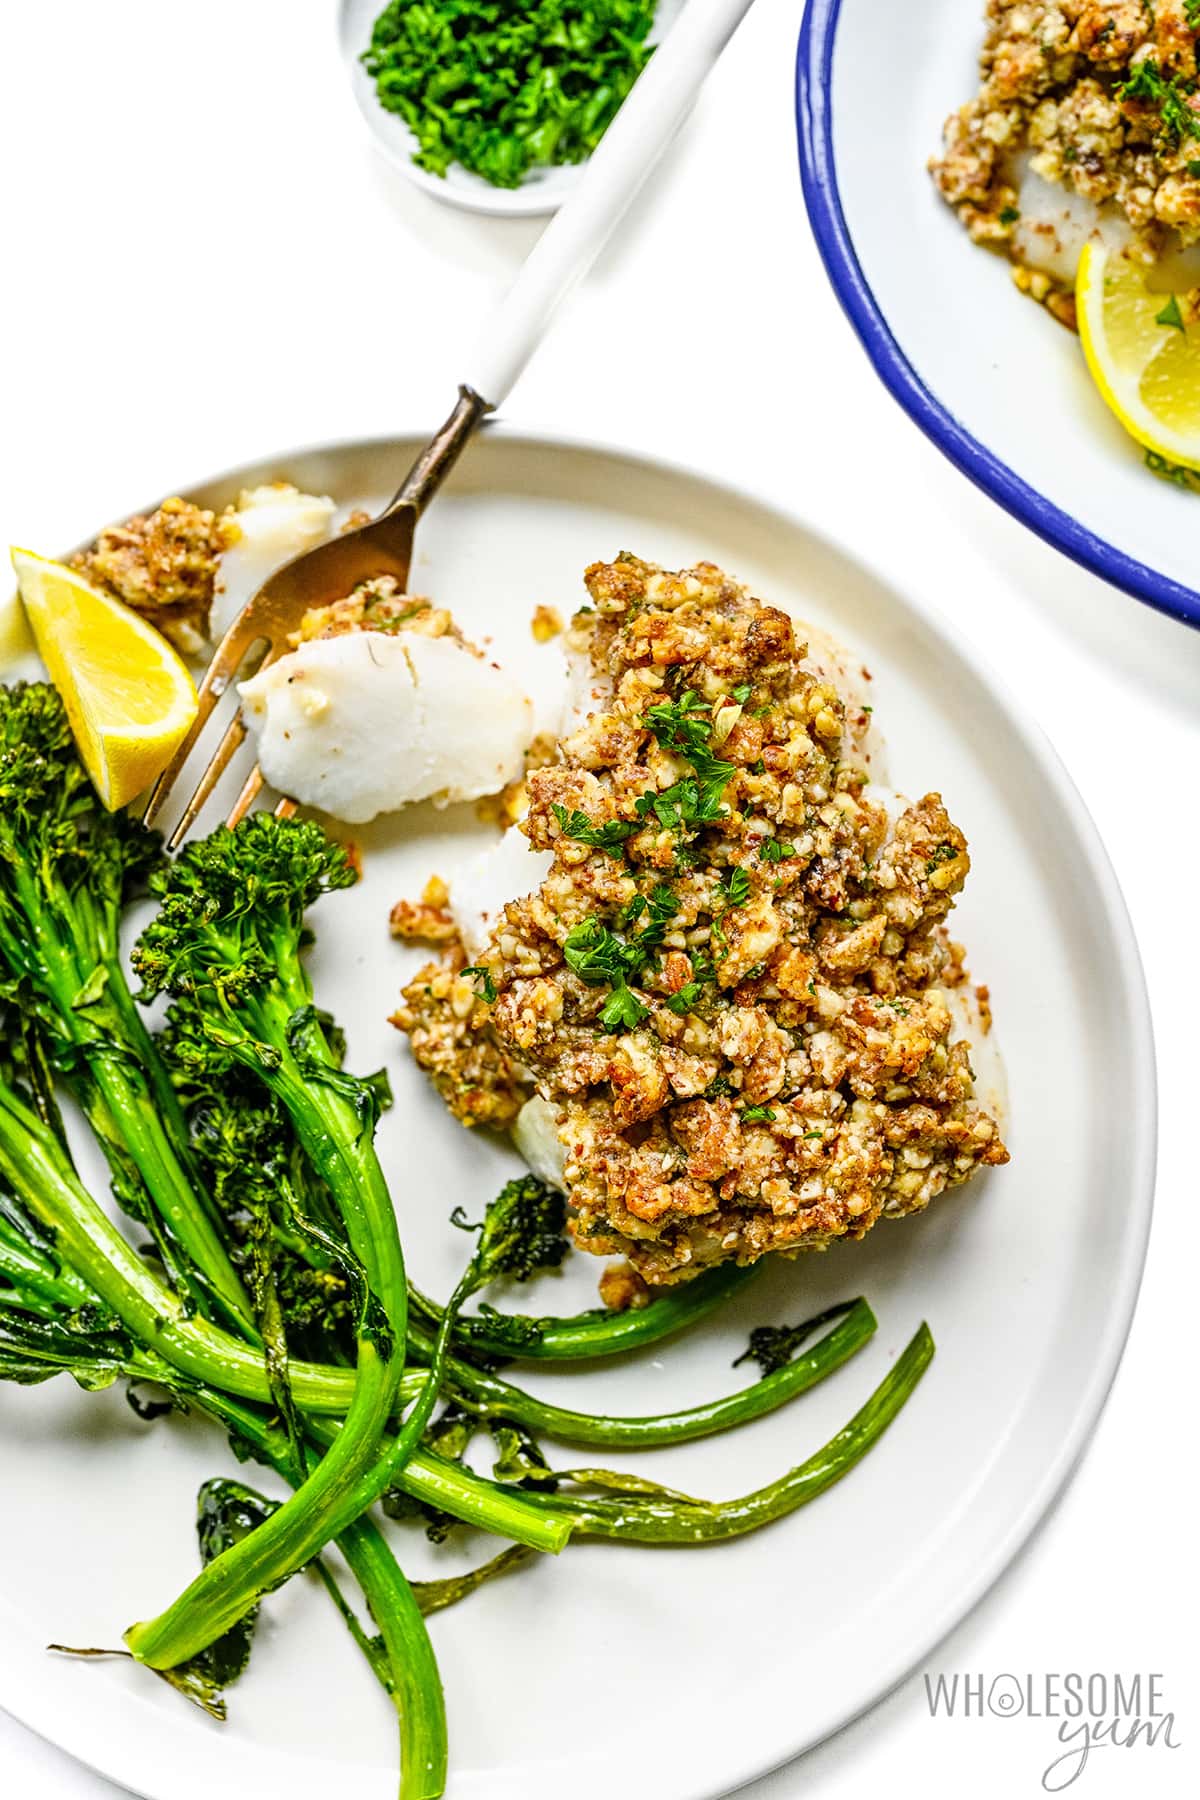 Broccolini on a plate with fish.